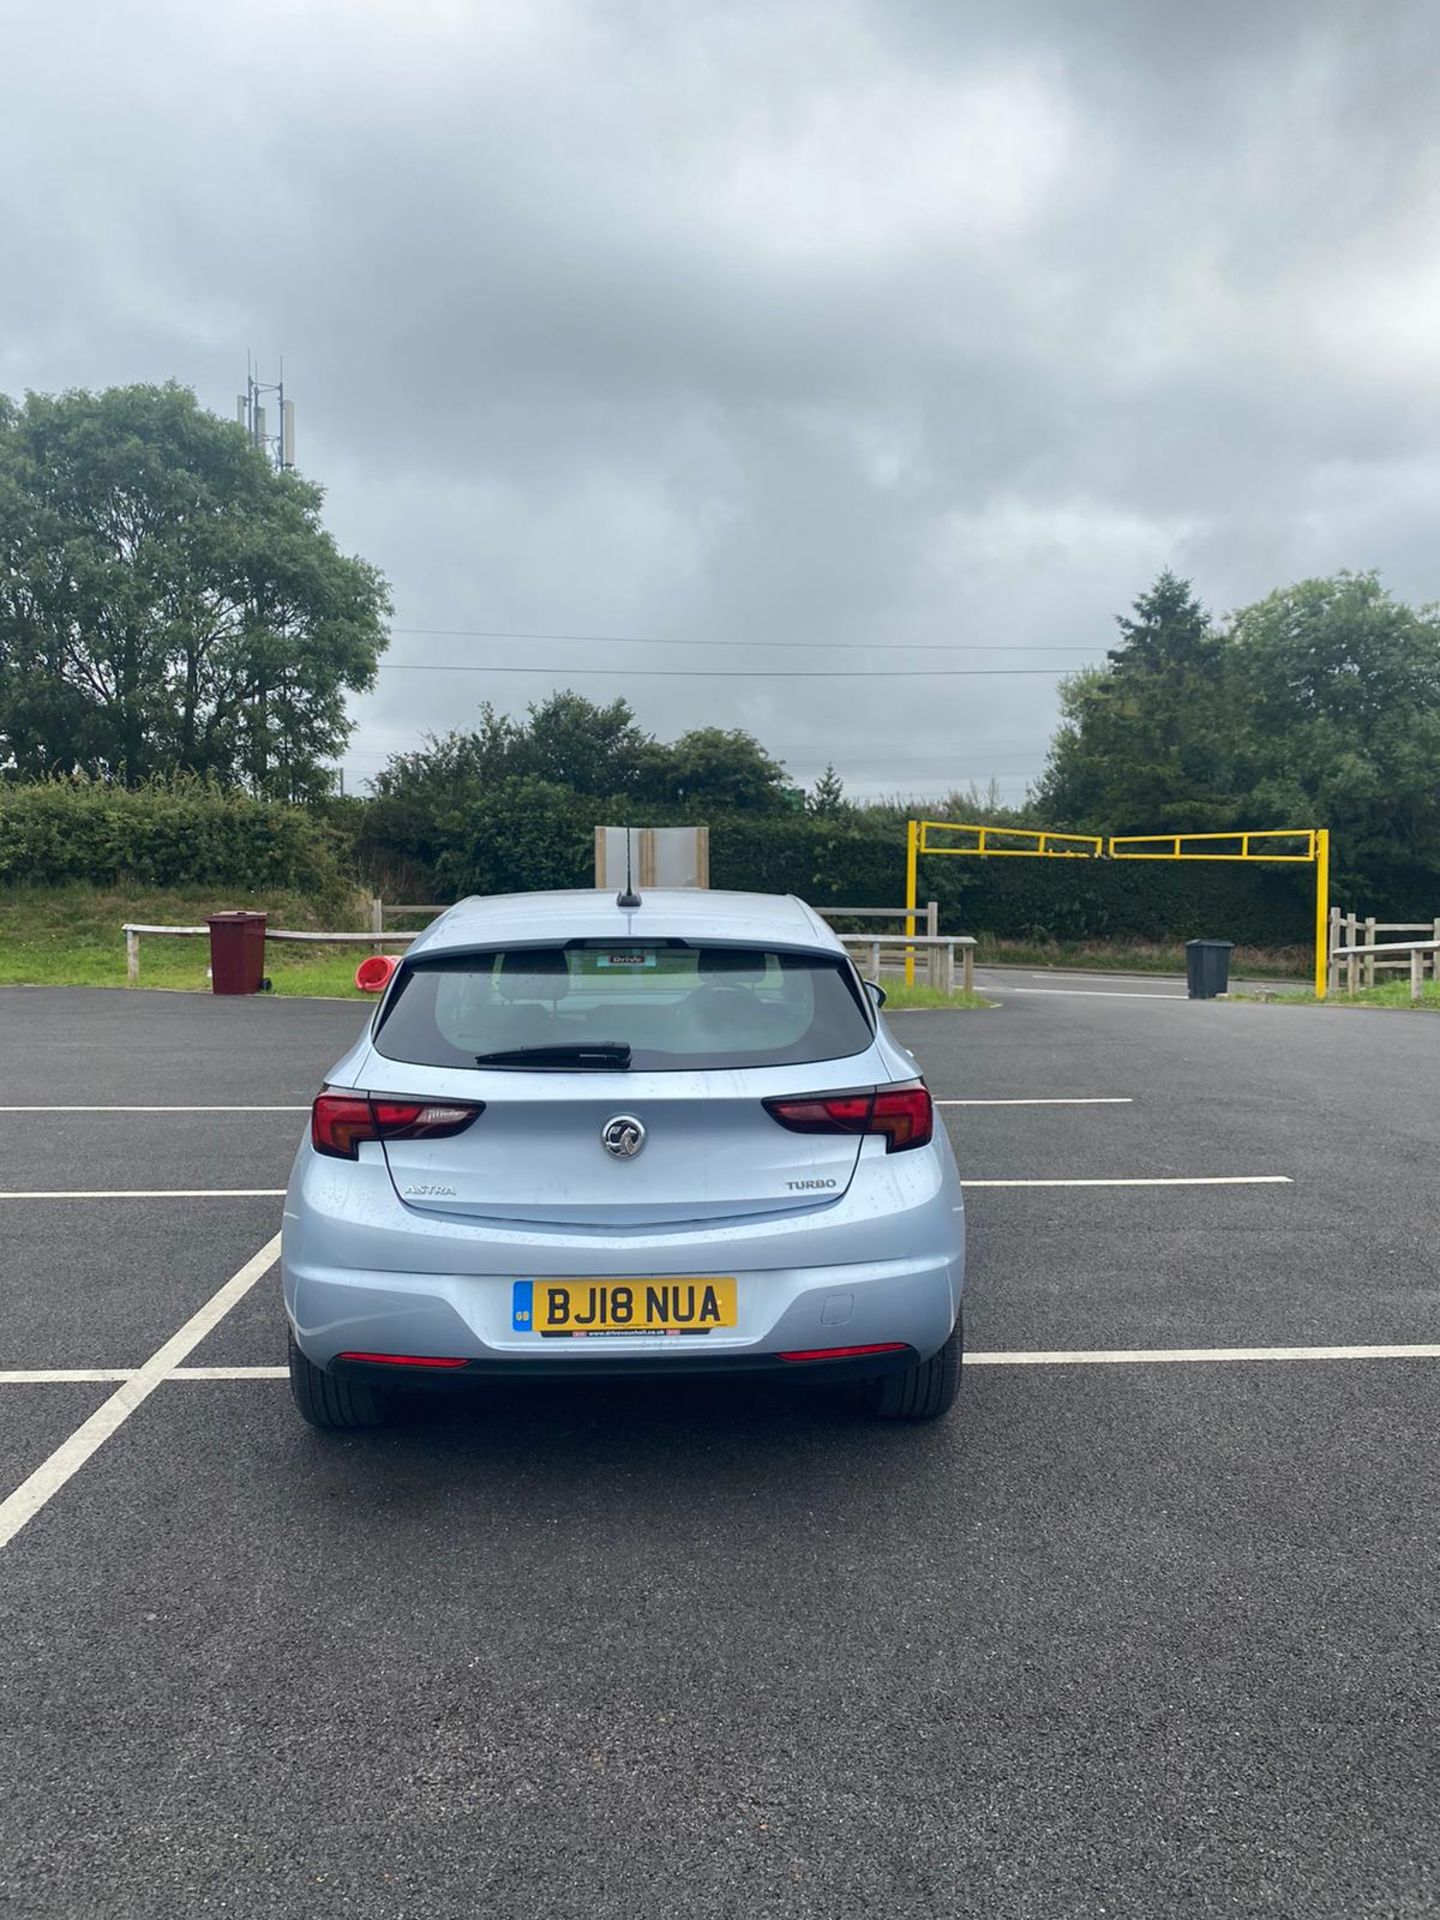 2018/18 REG VAUXHALL ASTRA SRI TURBO 1.4 PETROL SILVER 5 DOOR HATCHBACK, SHOWING 2 FORMER KEEPERS - Image 5 of 12